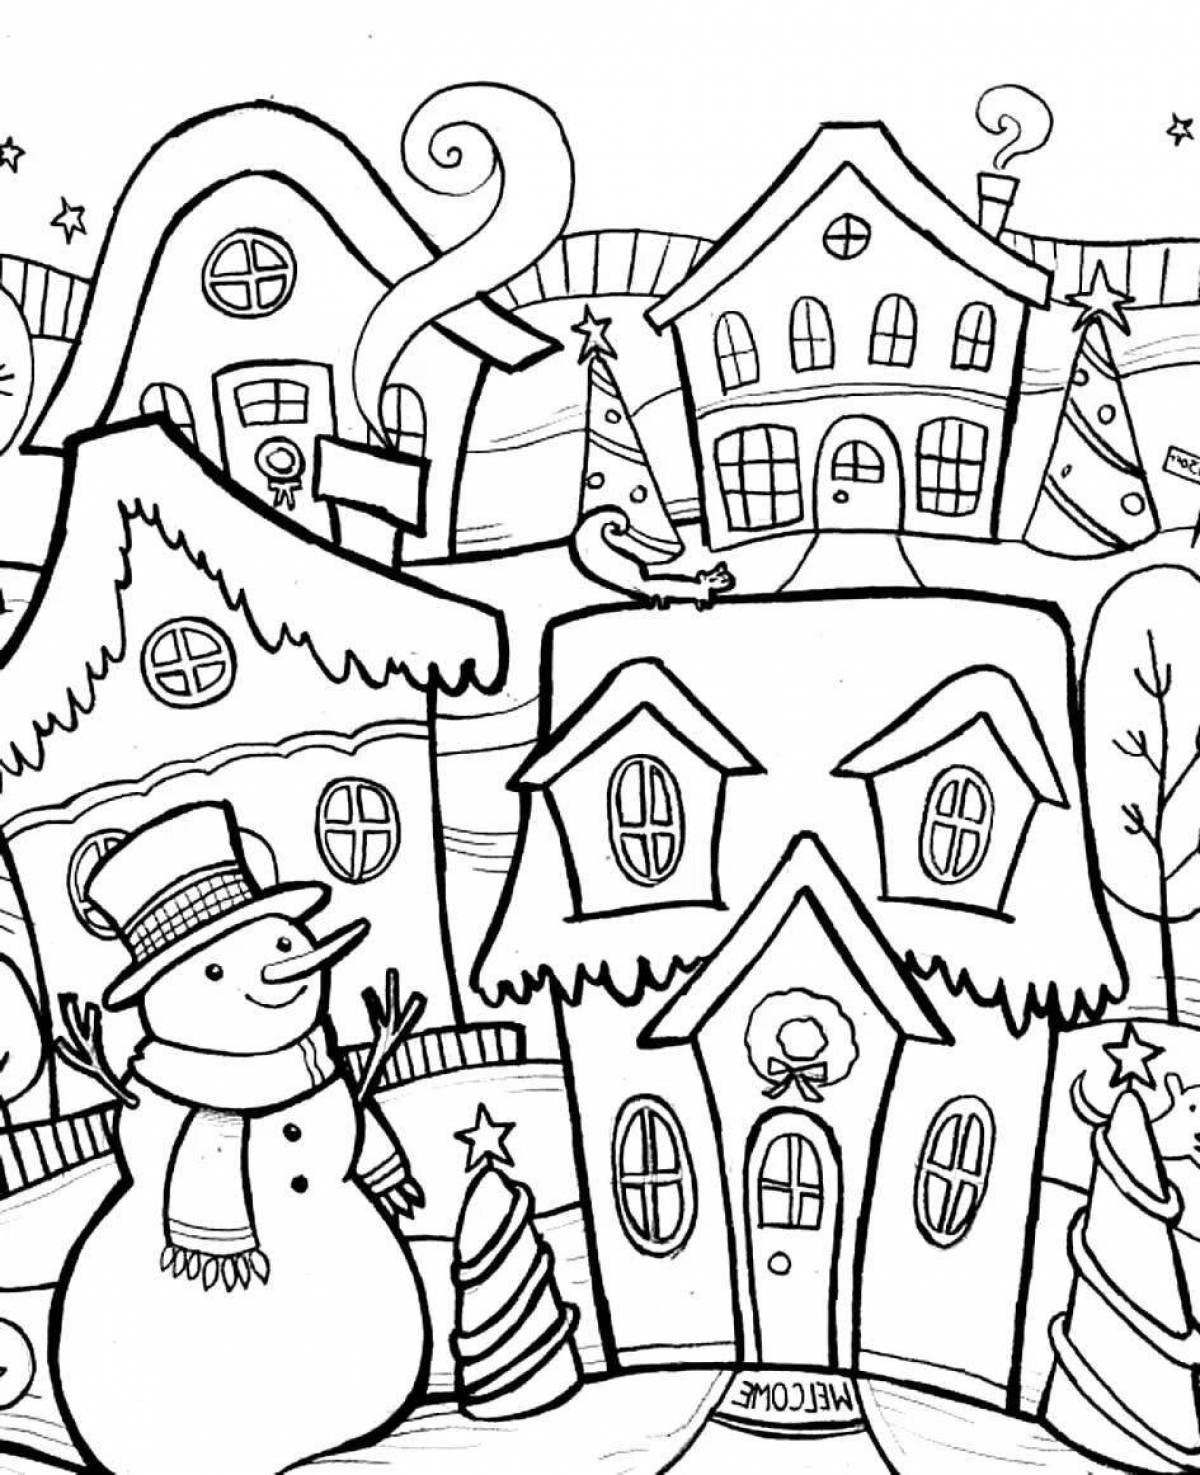 Glorious winter anti-stress coloring book for kids